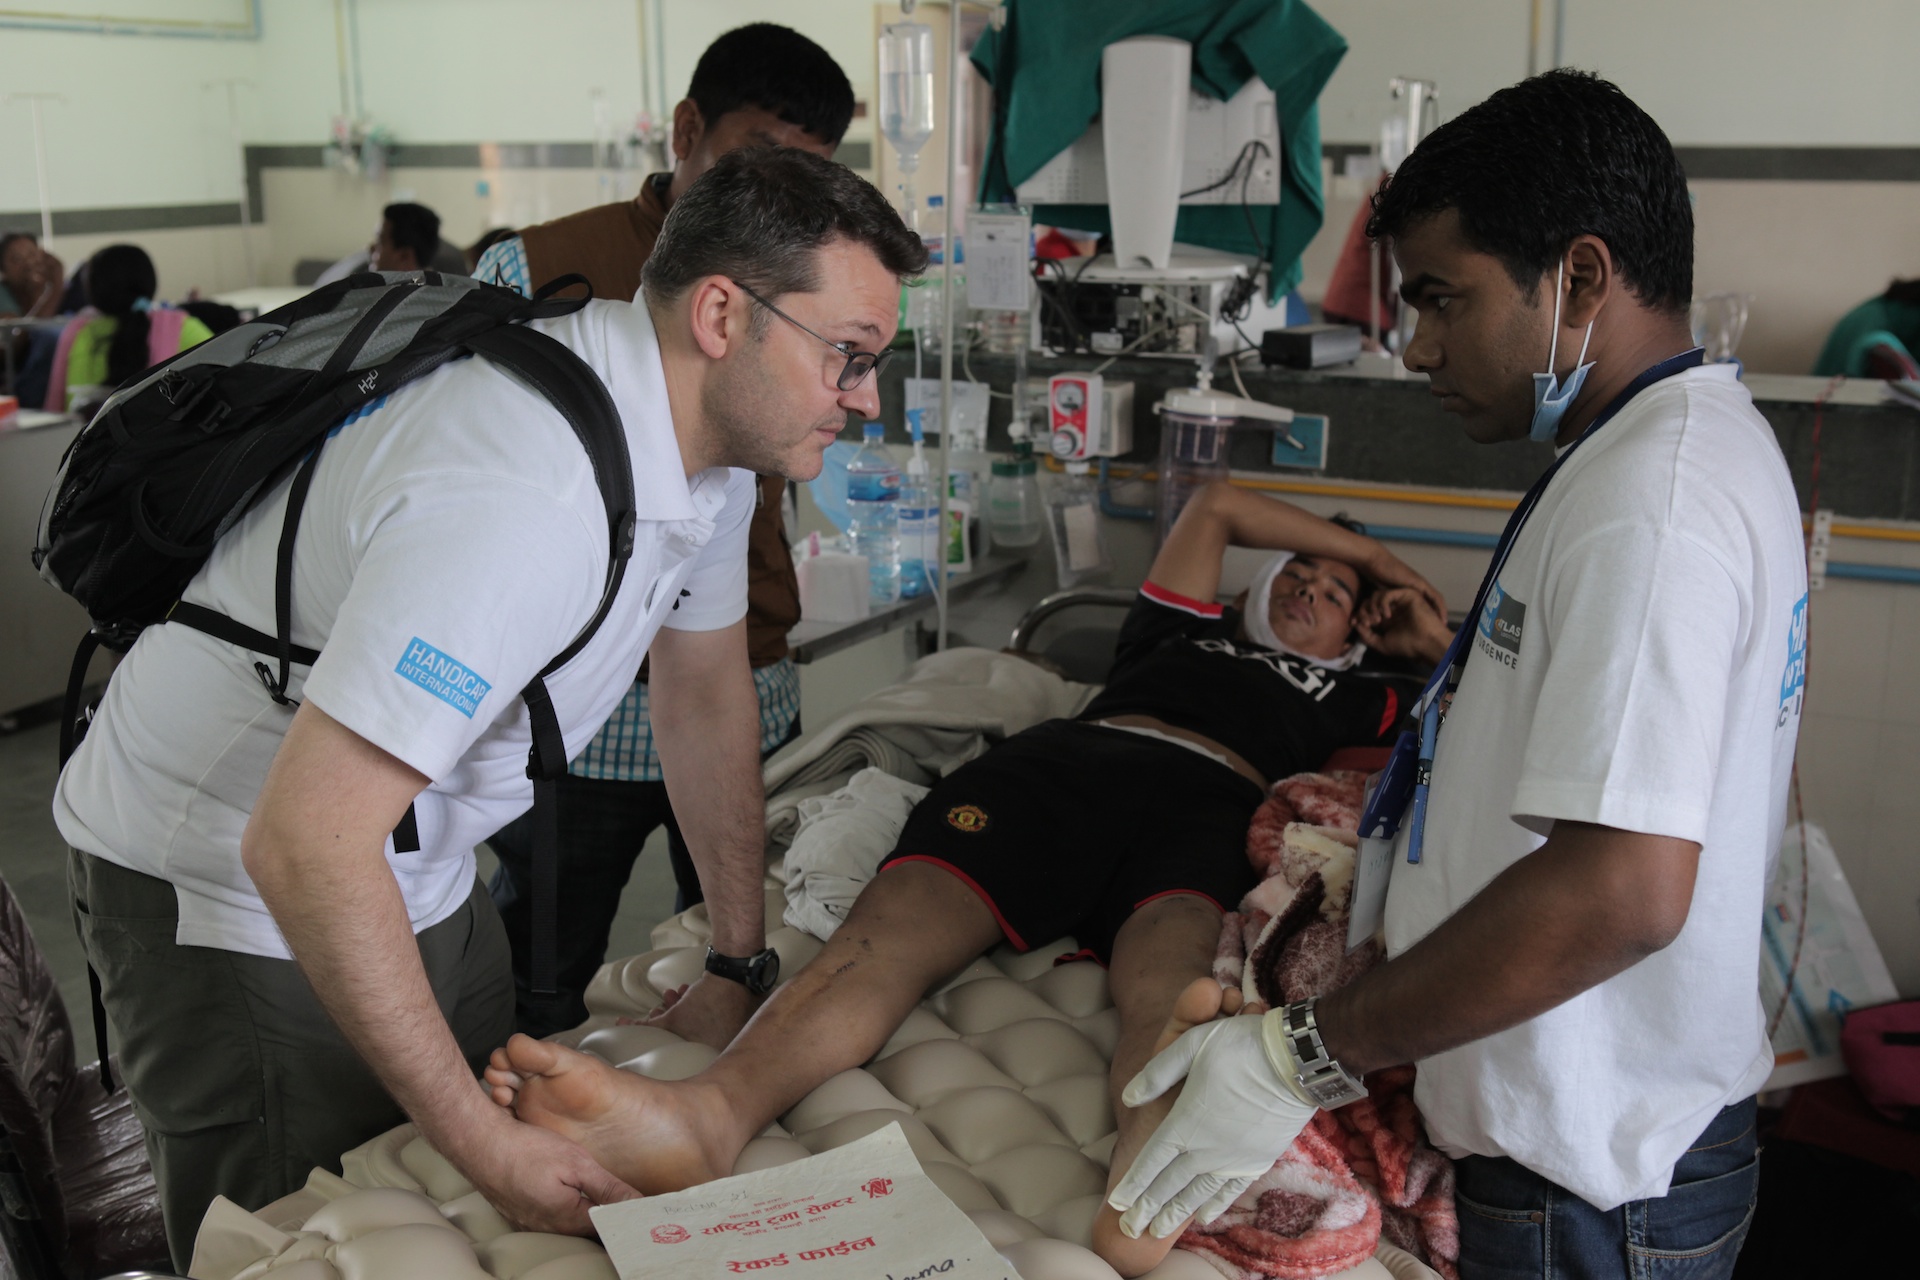 HI physical therapists attend to a victim of the Nepal earthquake with a spinal cord and a head injury.